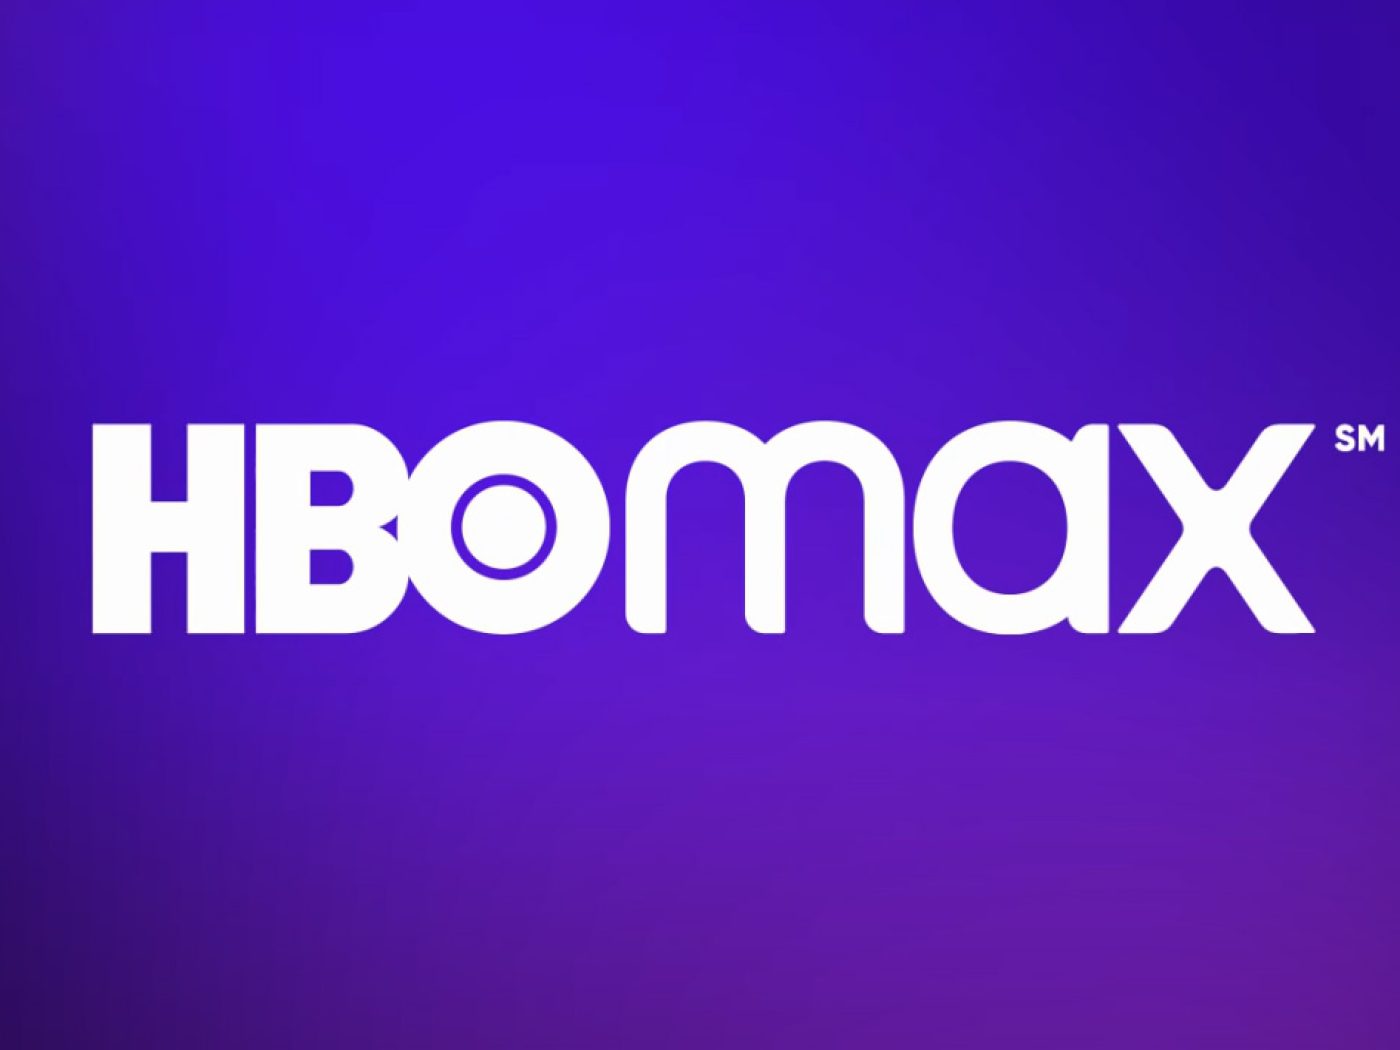 HBO Max Hikes Price for the First Time (But Not the Last)